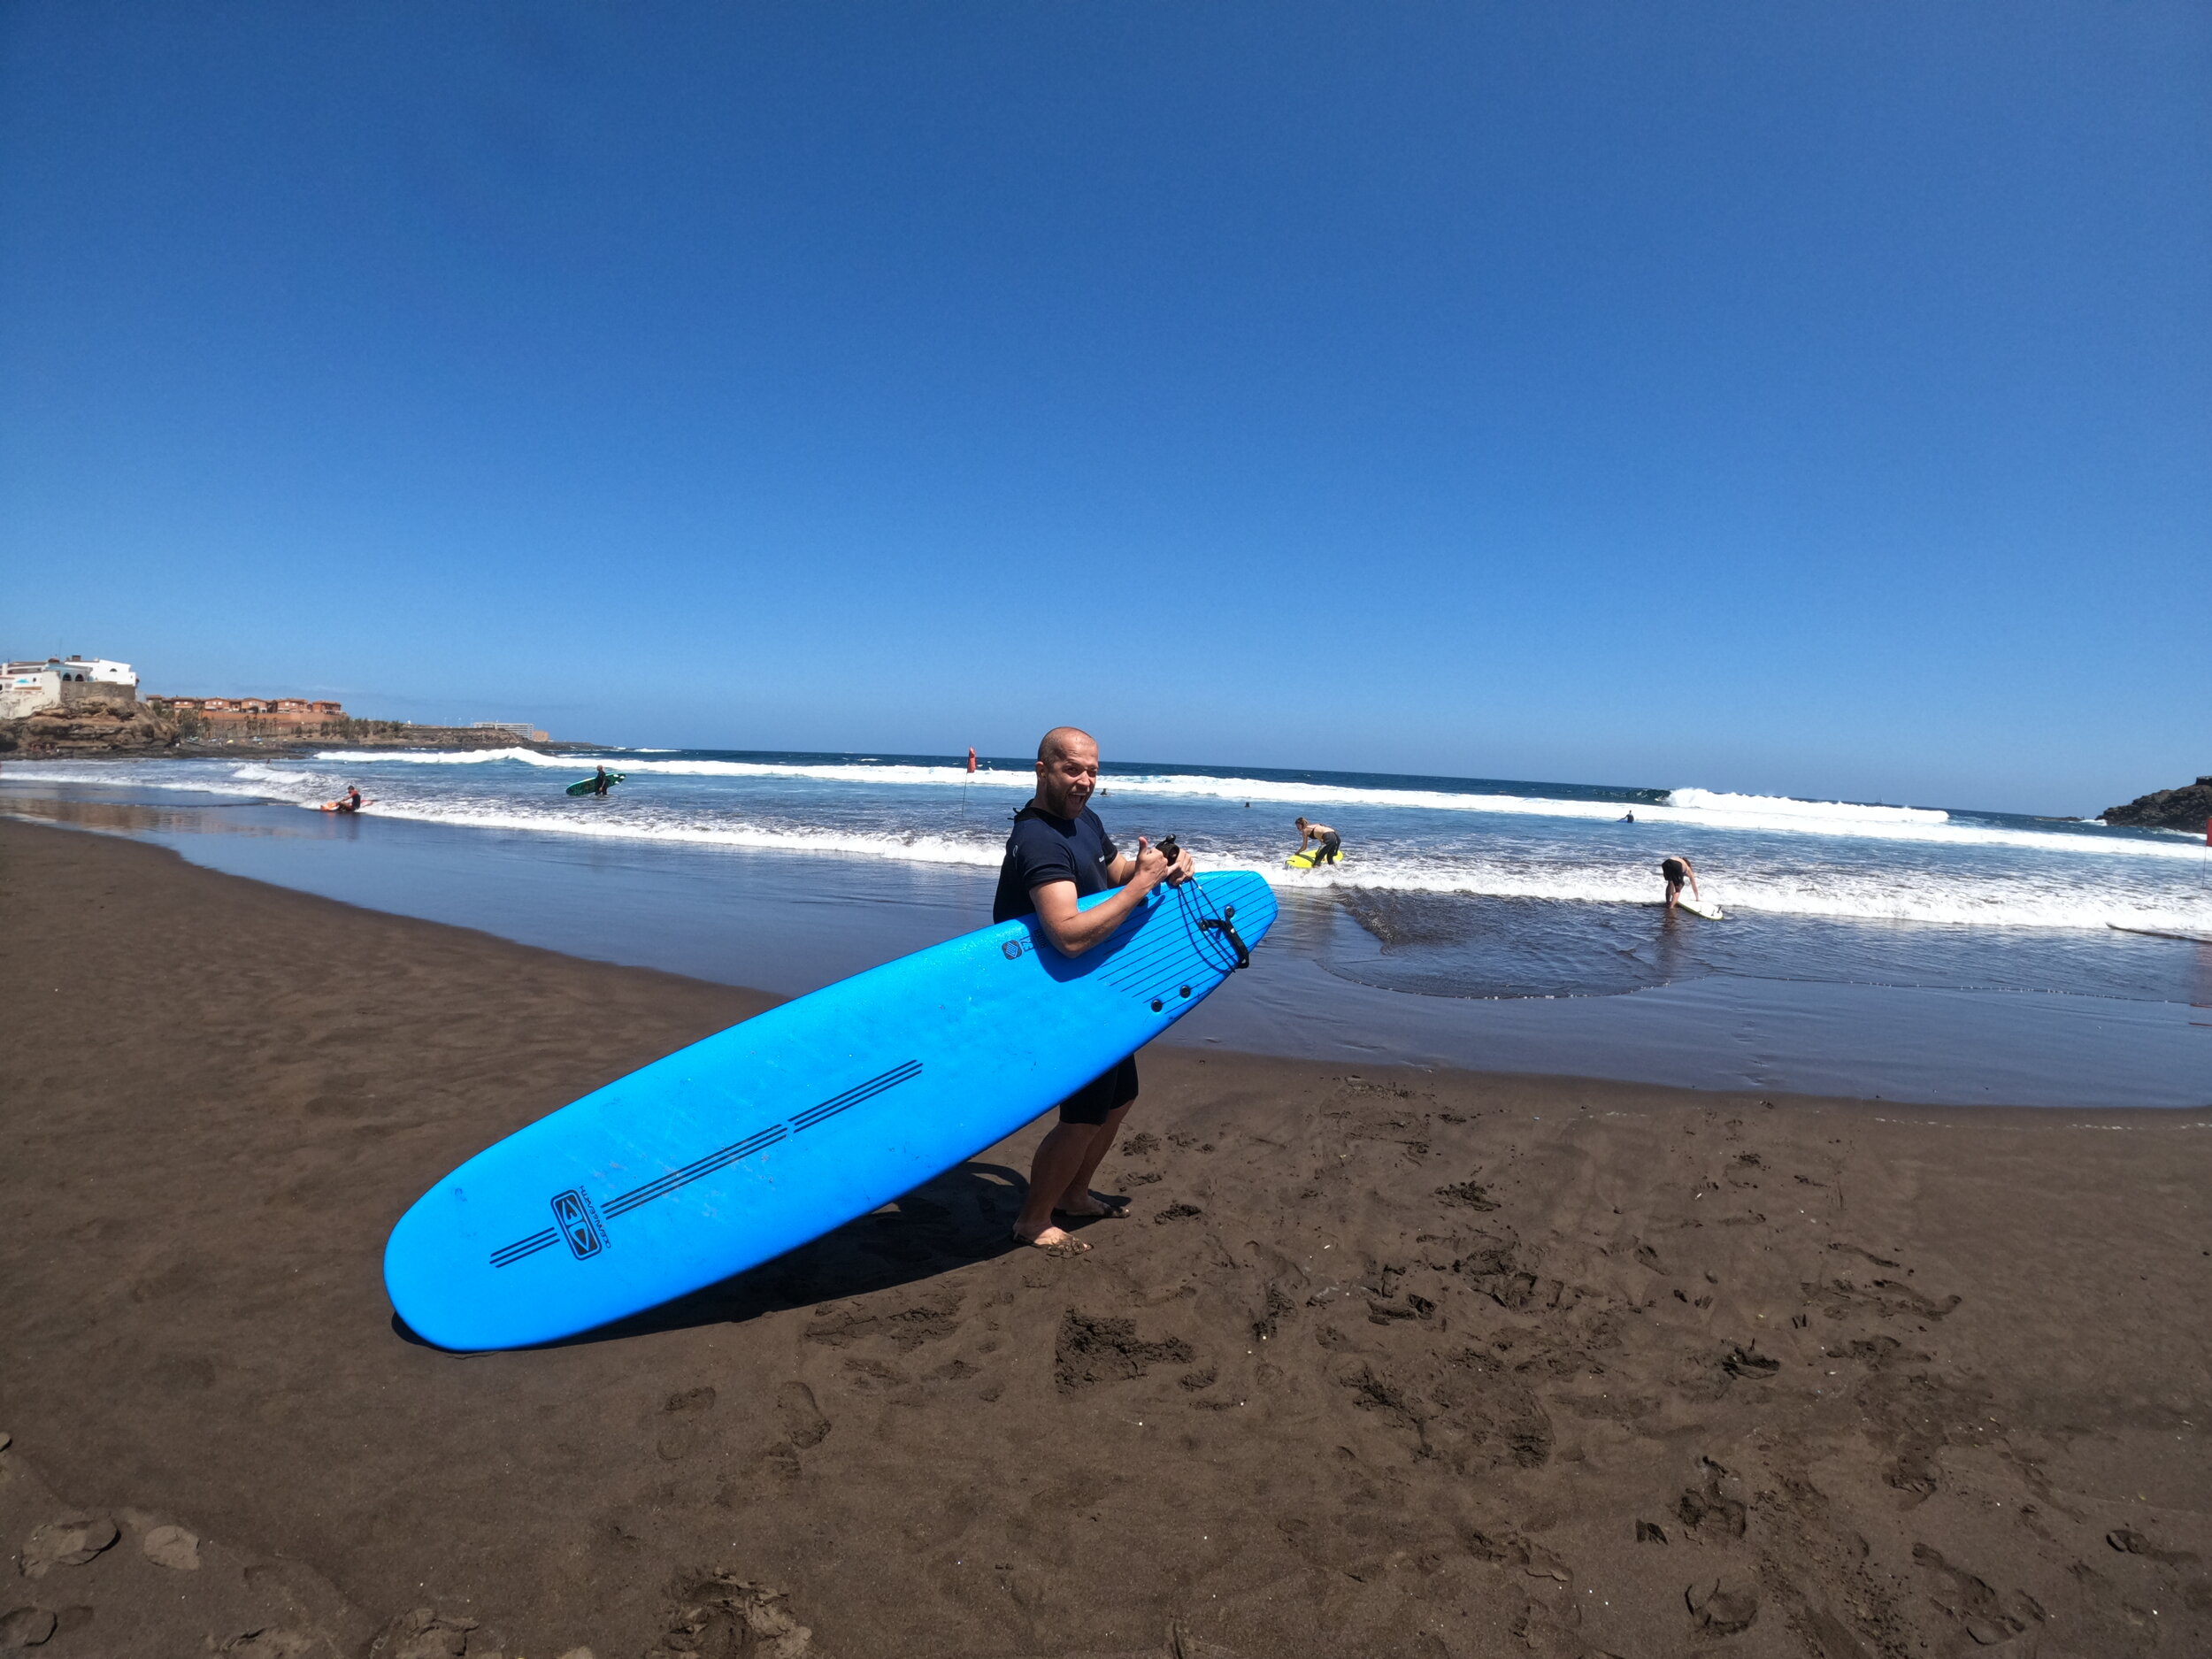 Fanatic Boarders Center Surfing Courses surfing  Maspalomas Kids surfinging courses group surfing courses surfing lessons on all the levels Private surfing.JPG